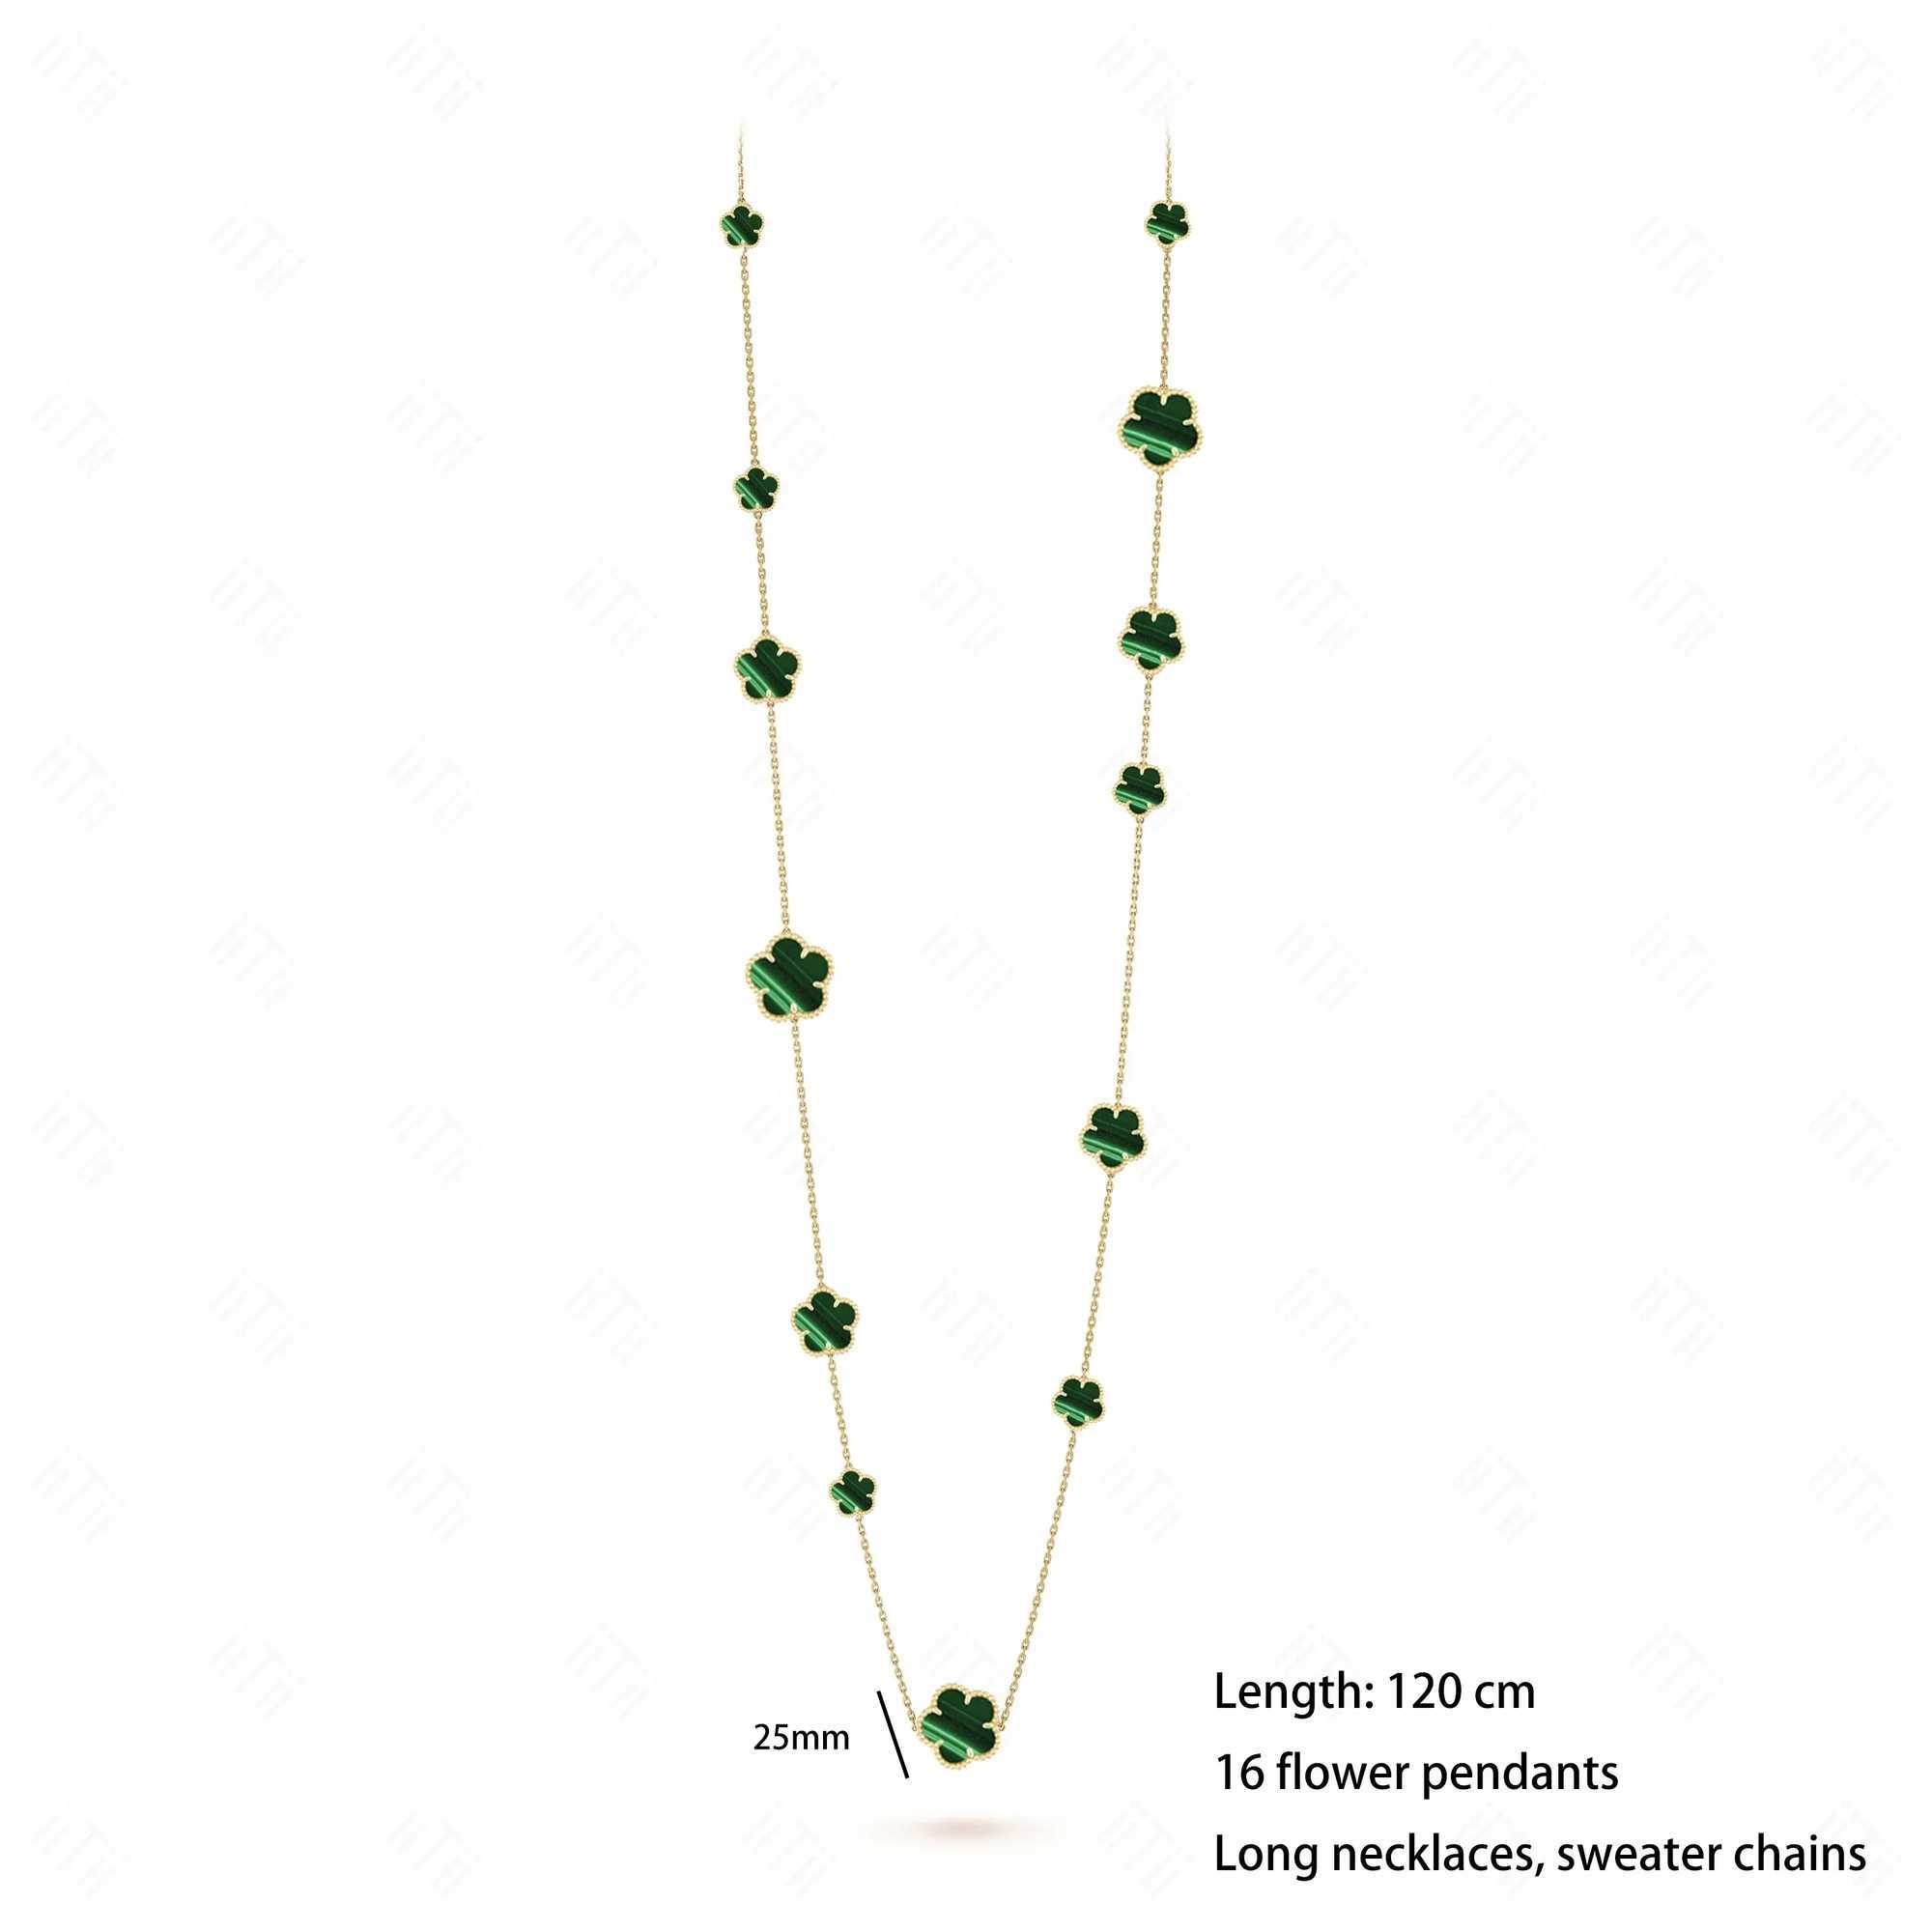 Pendant Necklaces Hot selling natural gemstone Four-leaf Clover/Five-leaf Flower necklace Simple white shell sweater chain for women party jewelry 240410